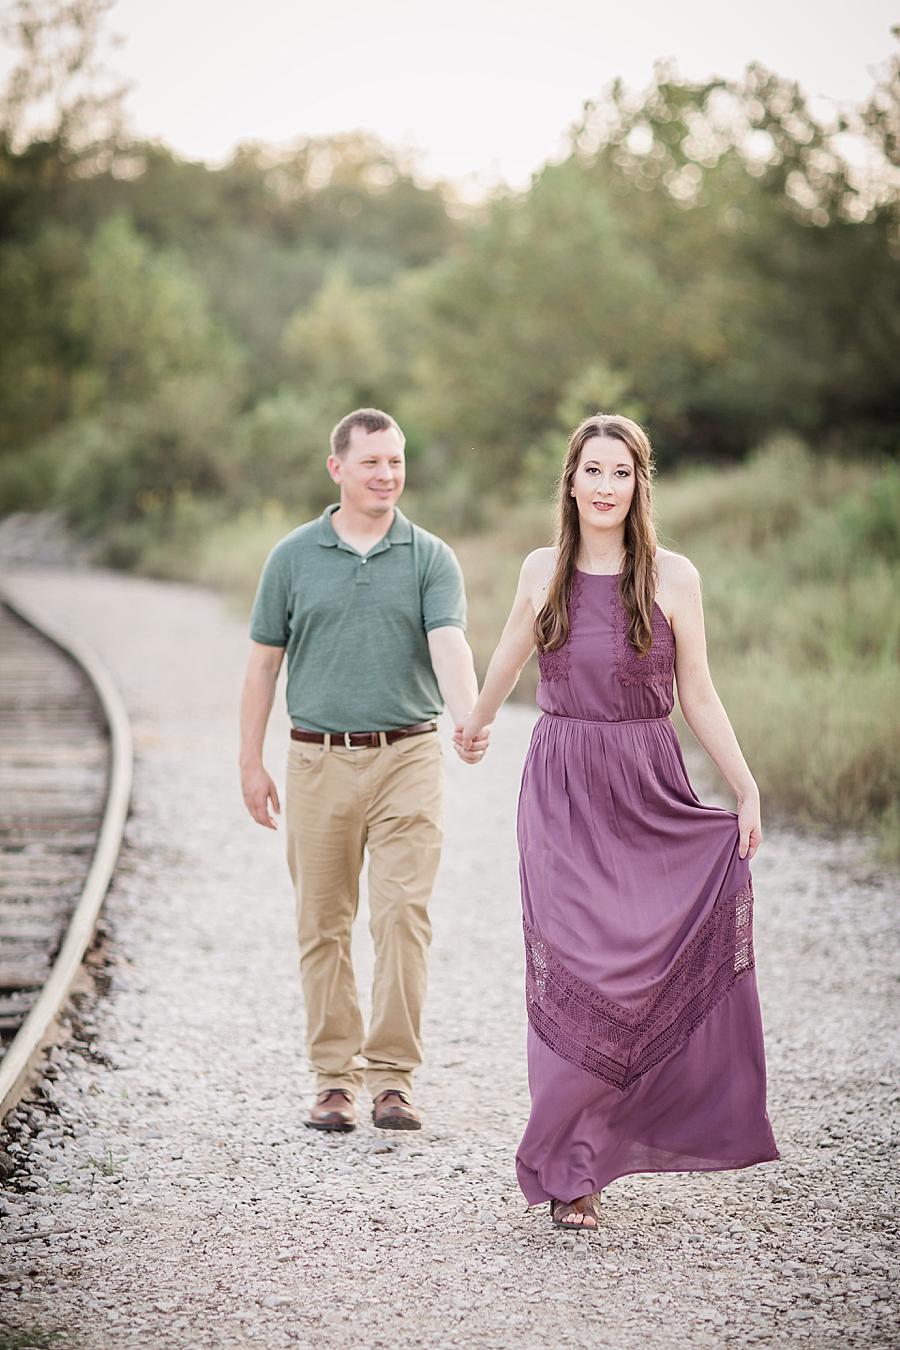 Gravel path at this Meads Quarry Family Session by Knoxville Wedding Photographer, Amanda May Photos.